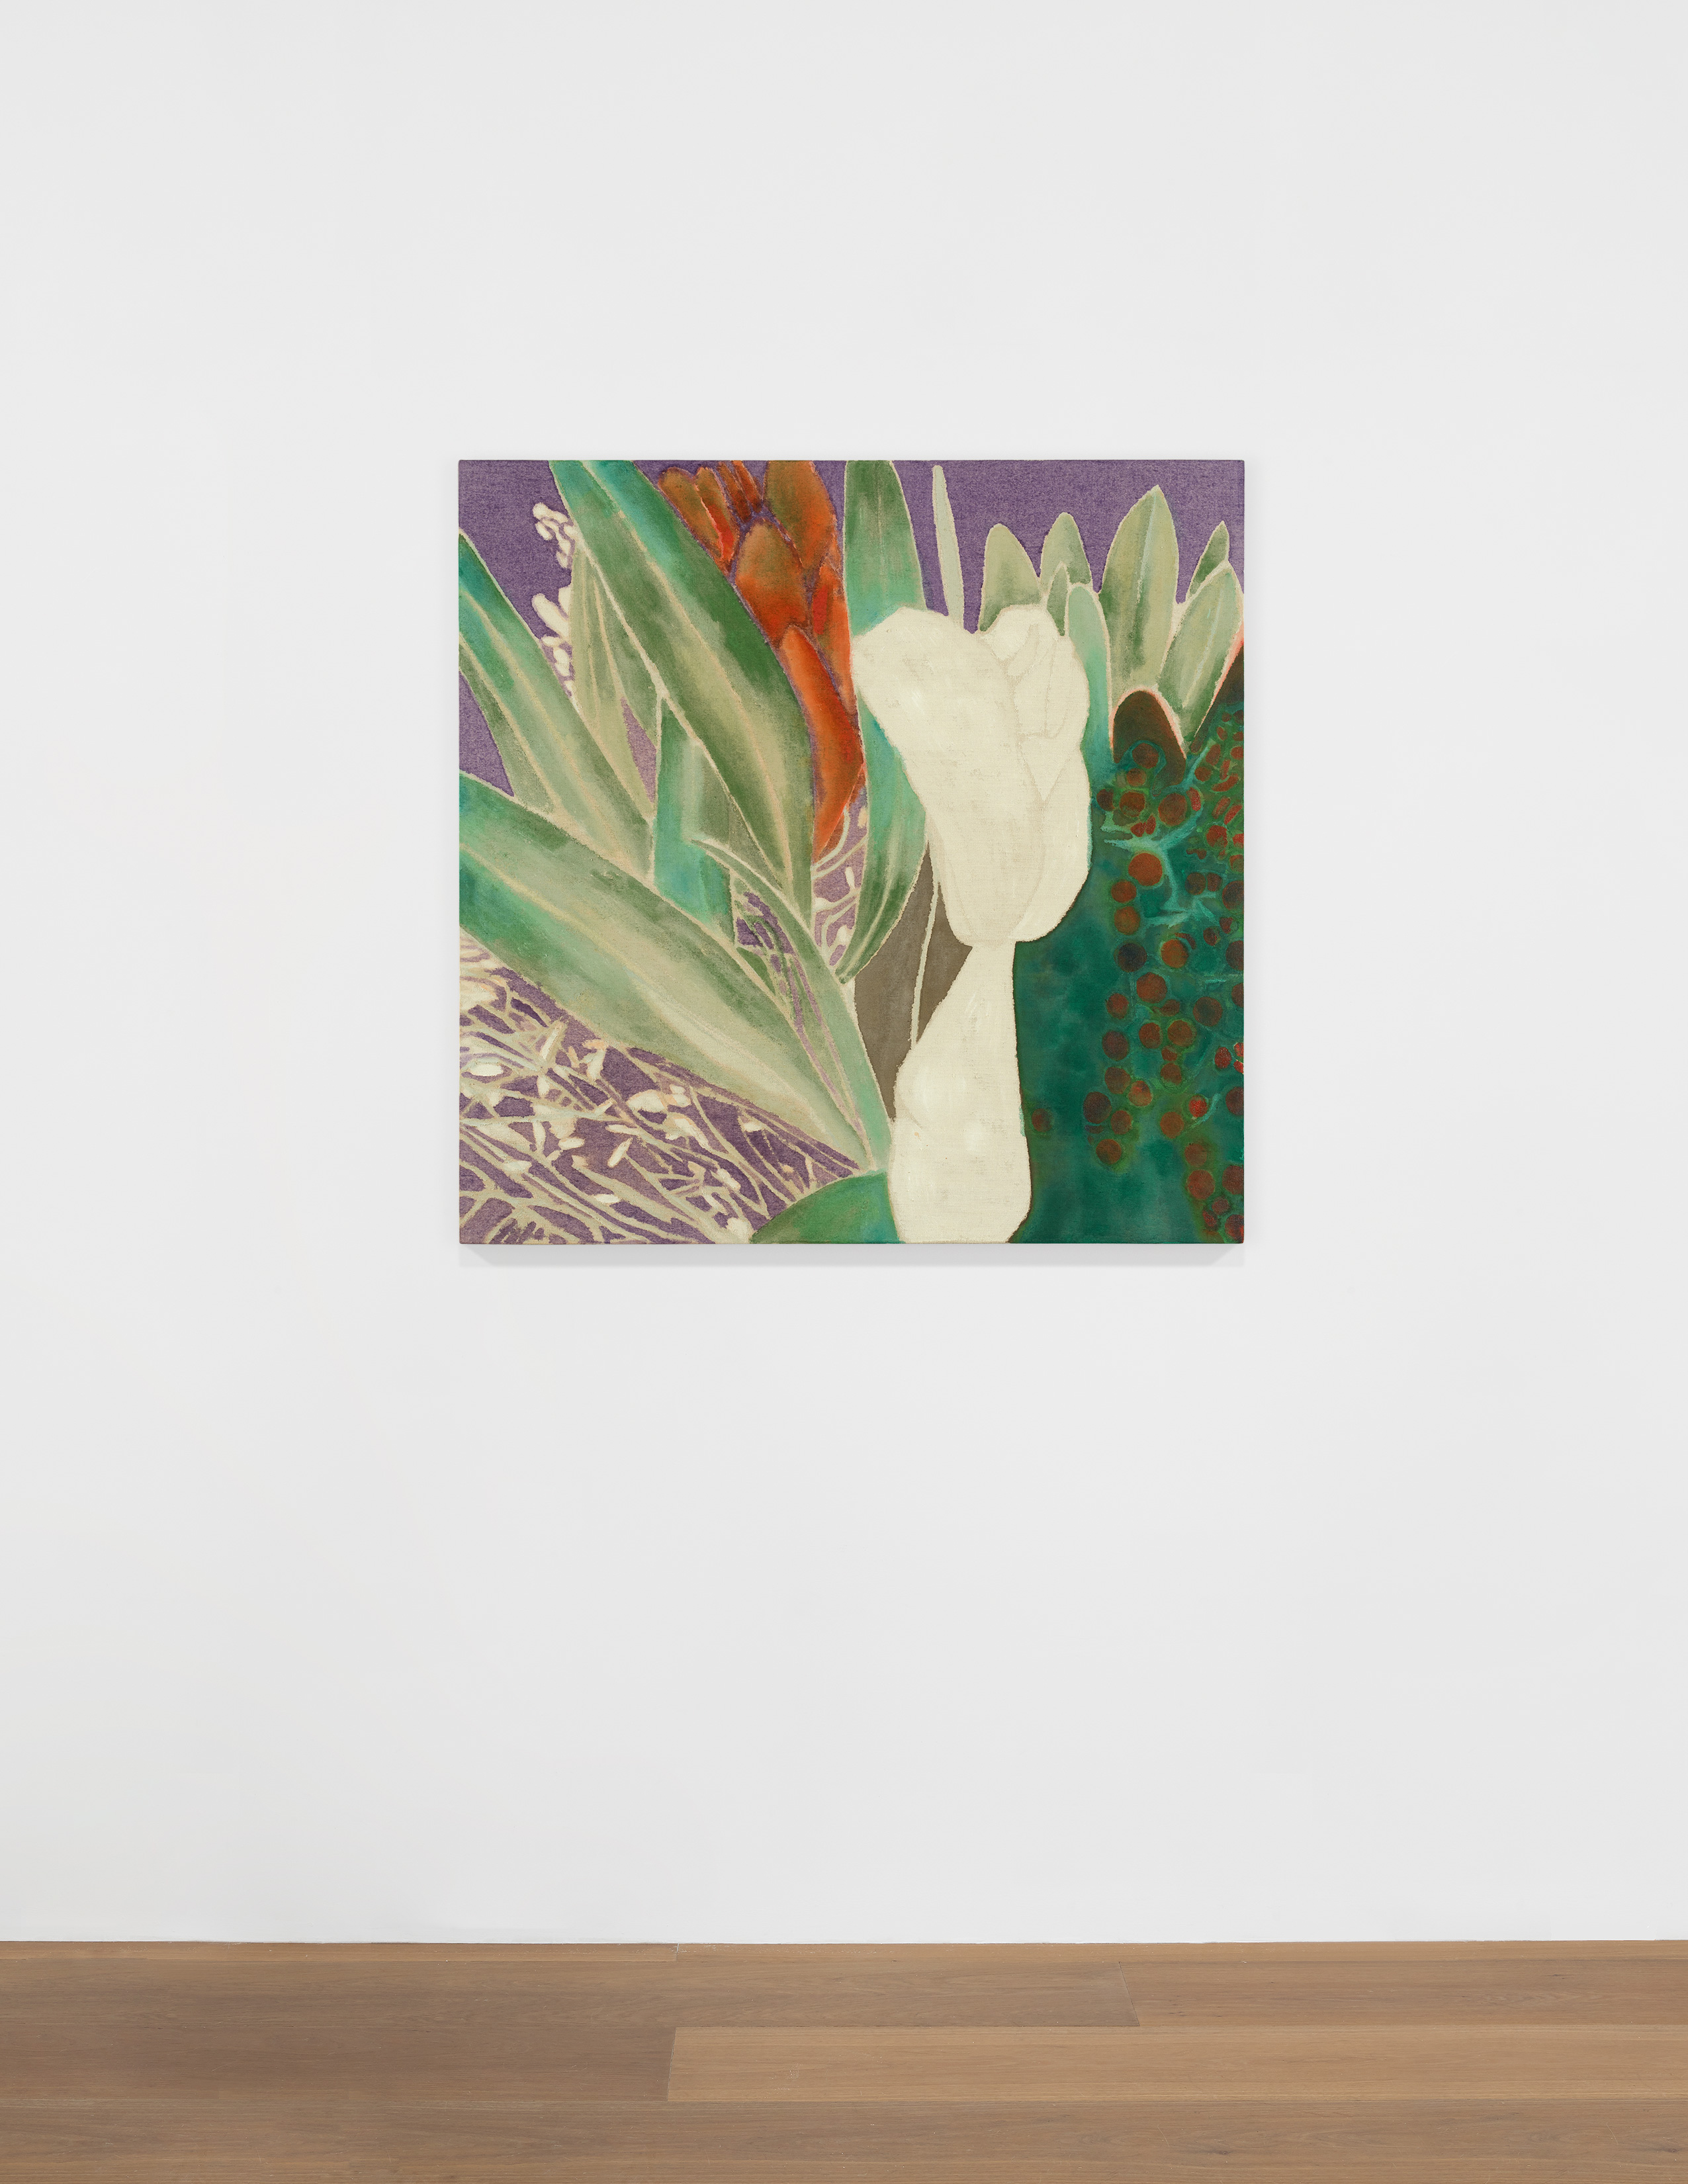 Installation view of Francesco Clemente's painting Winter Flowers IX